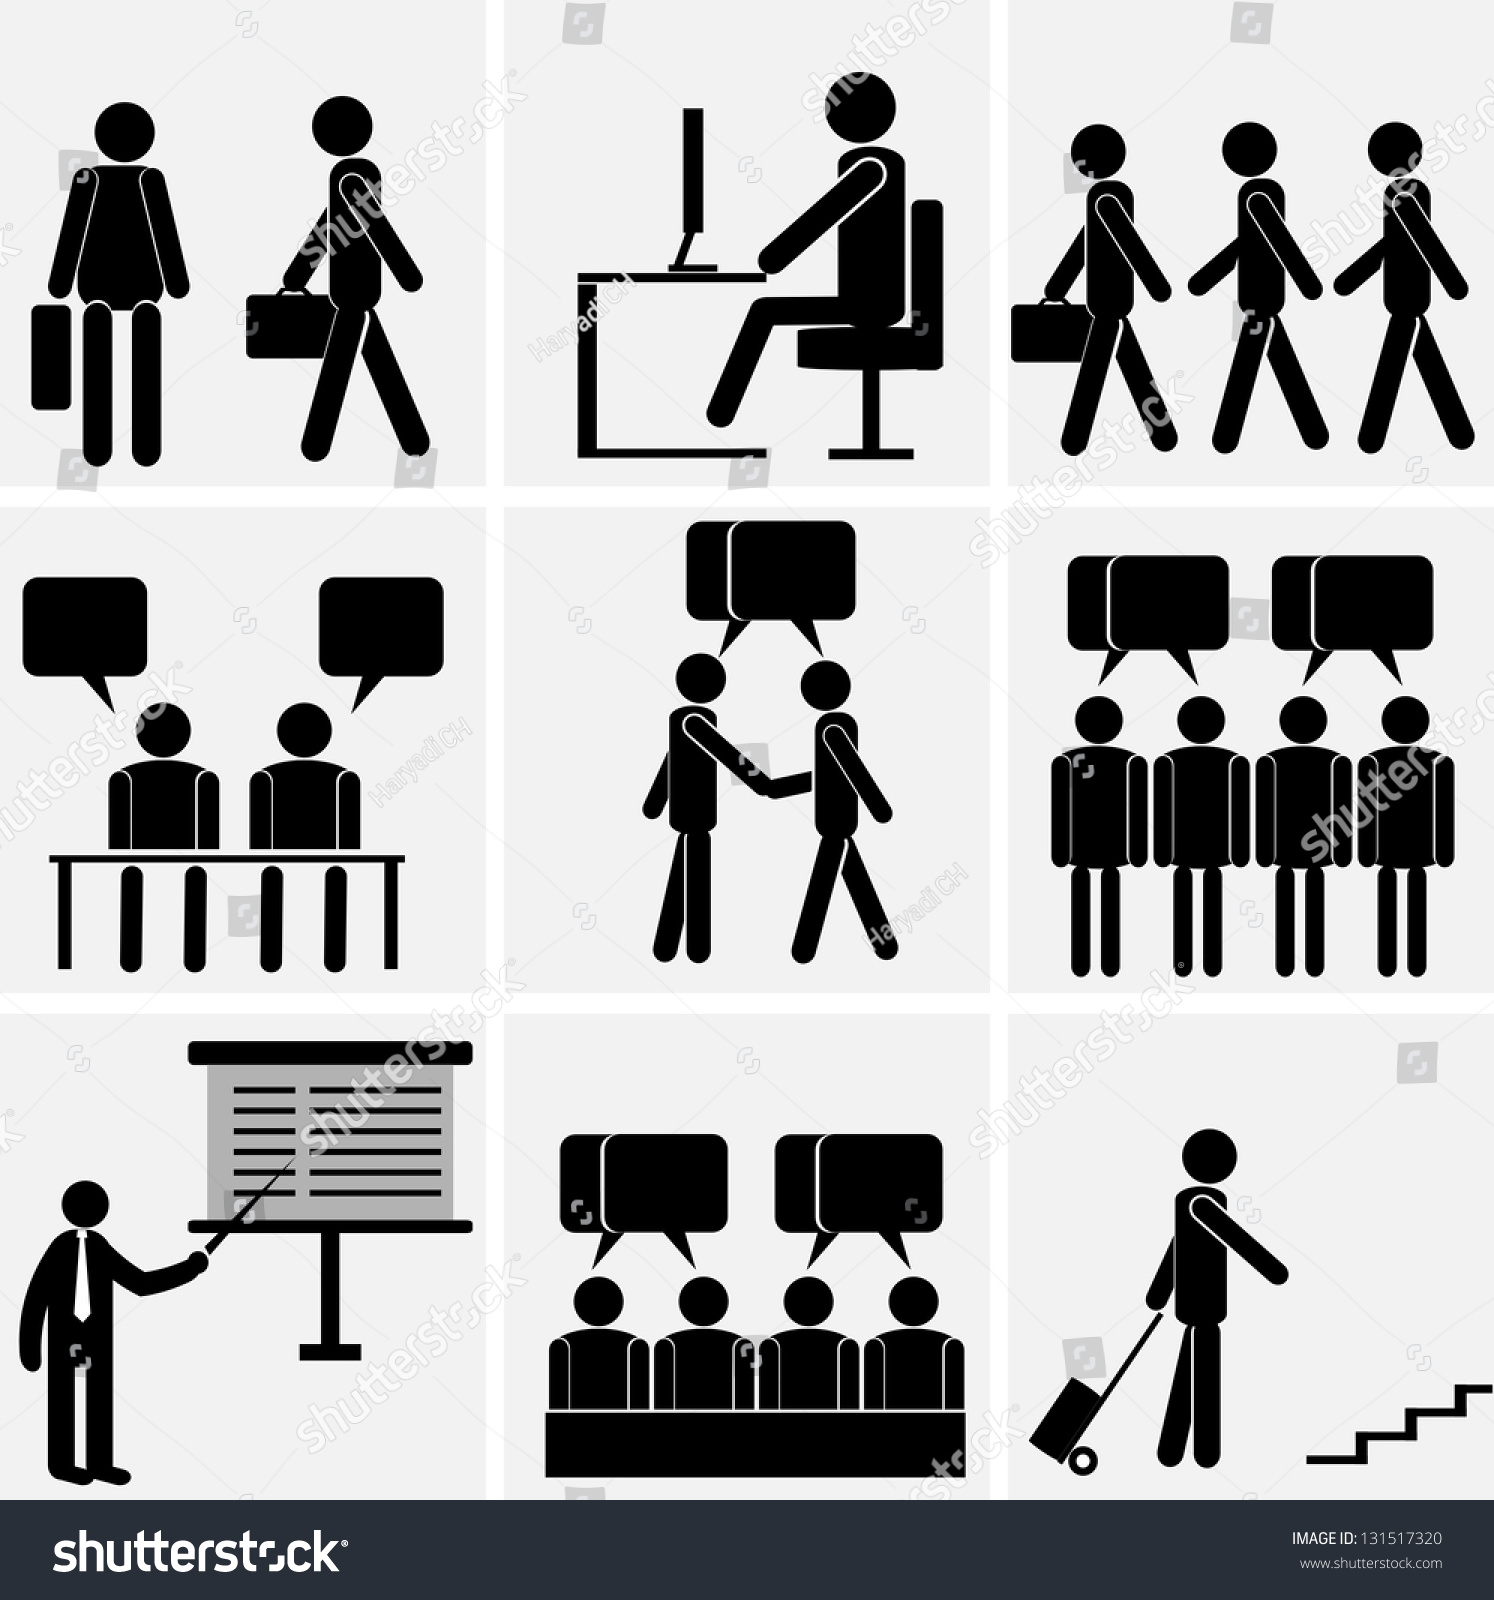 Office People Icons Set. Stock Vector Illustration 131517320 : Shutterstock